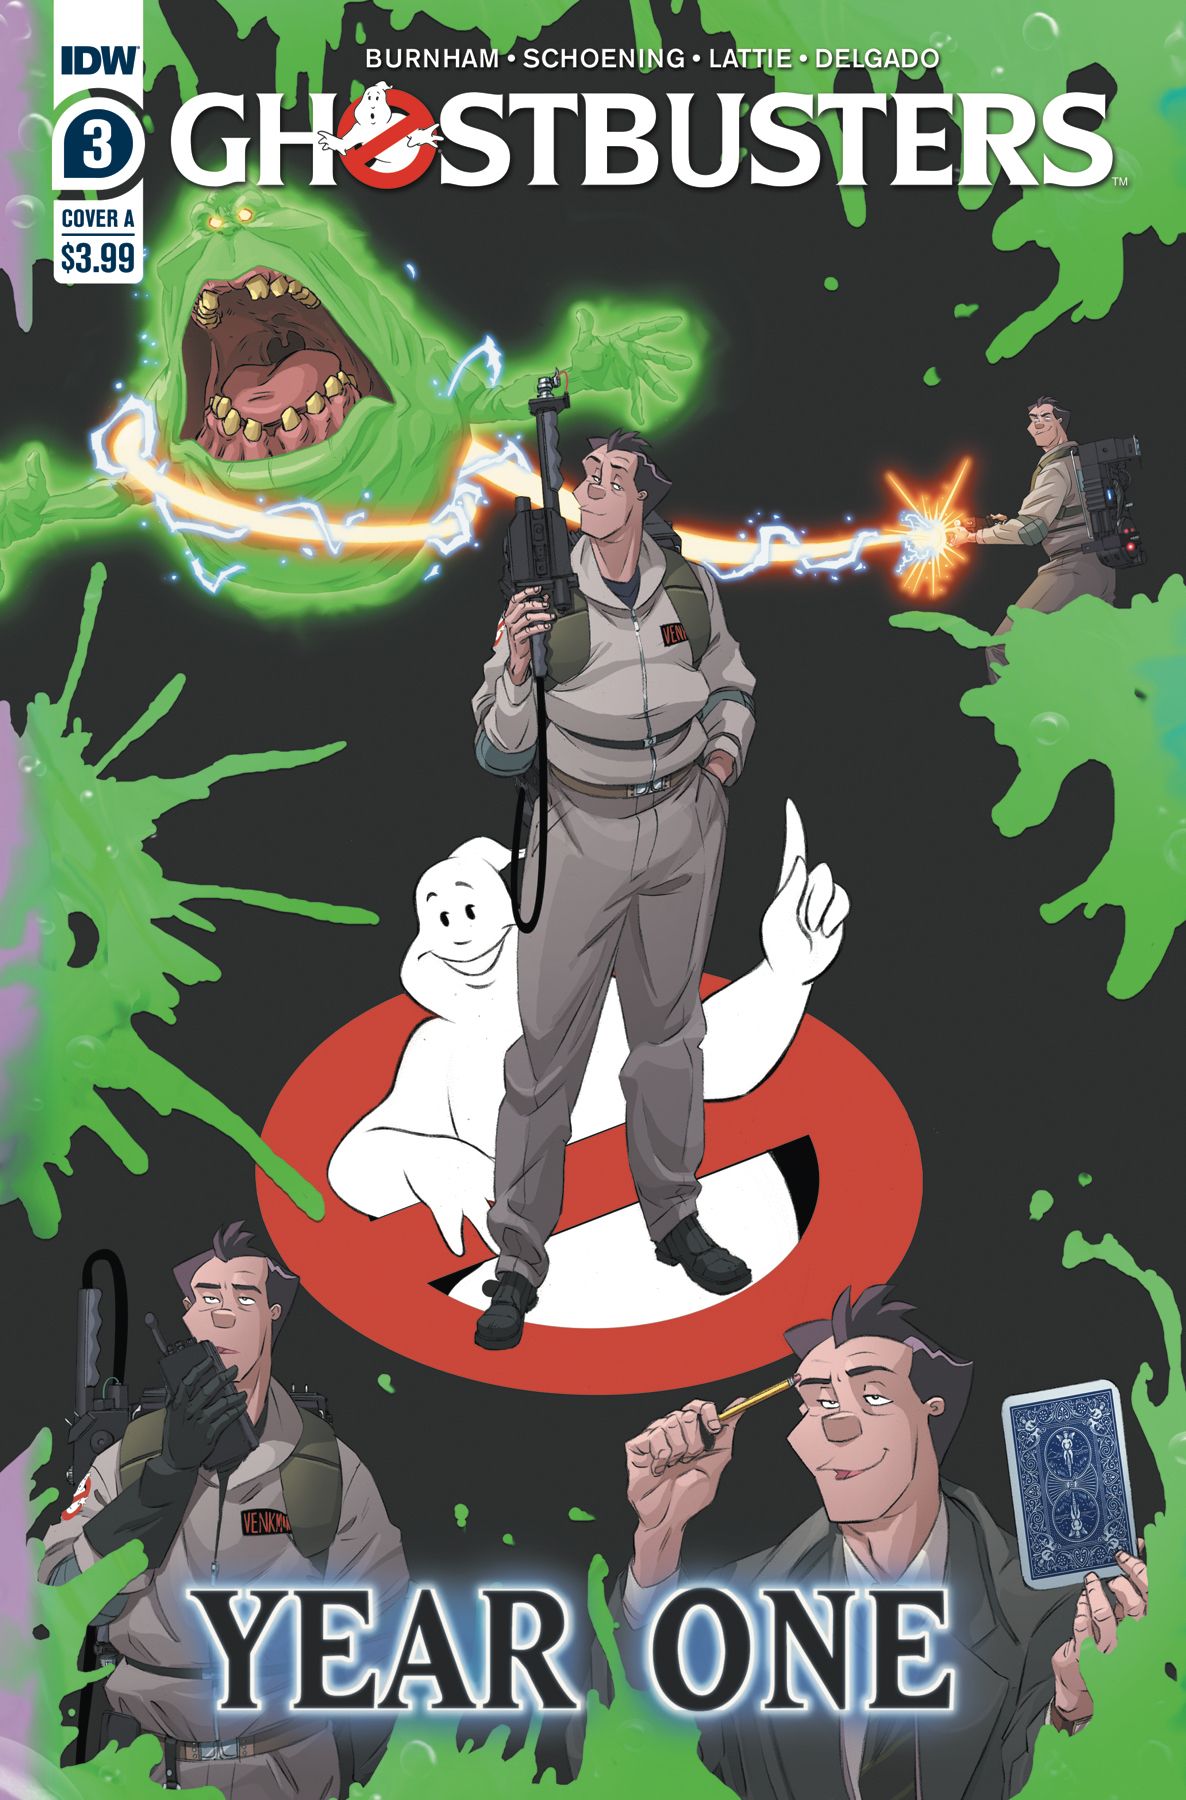 Ghostbusters: Year One #3 Comic